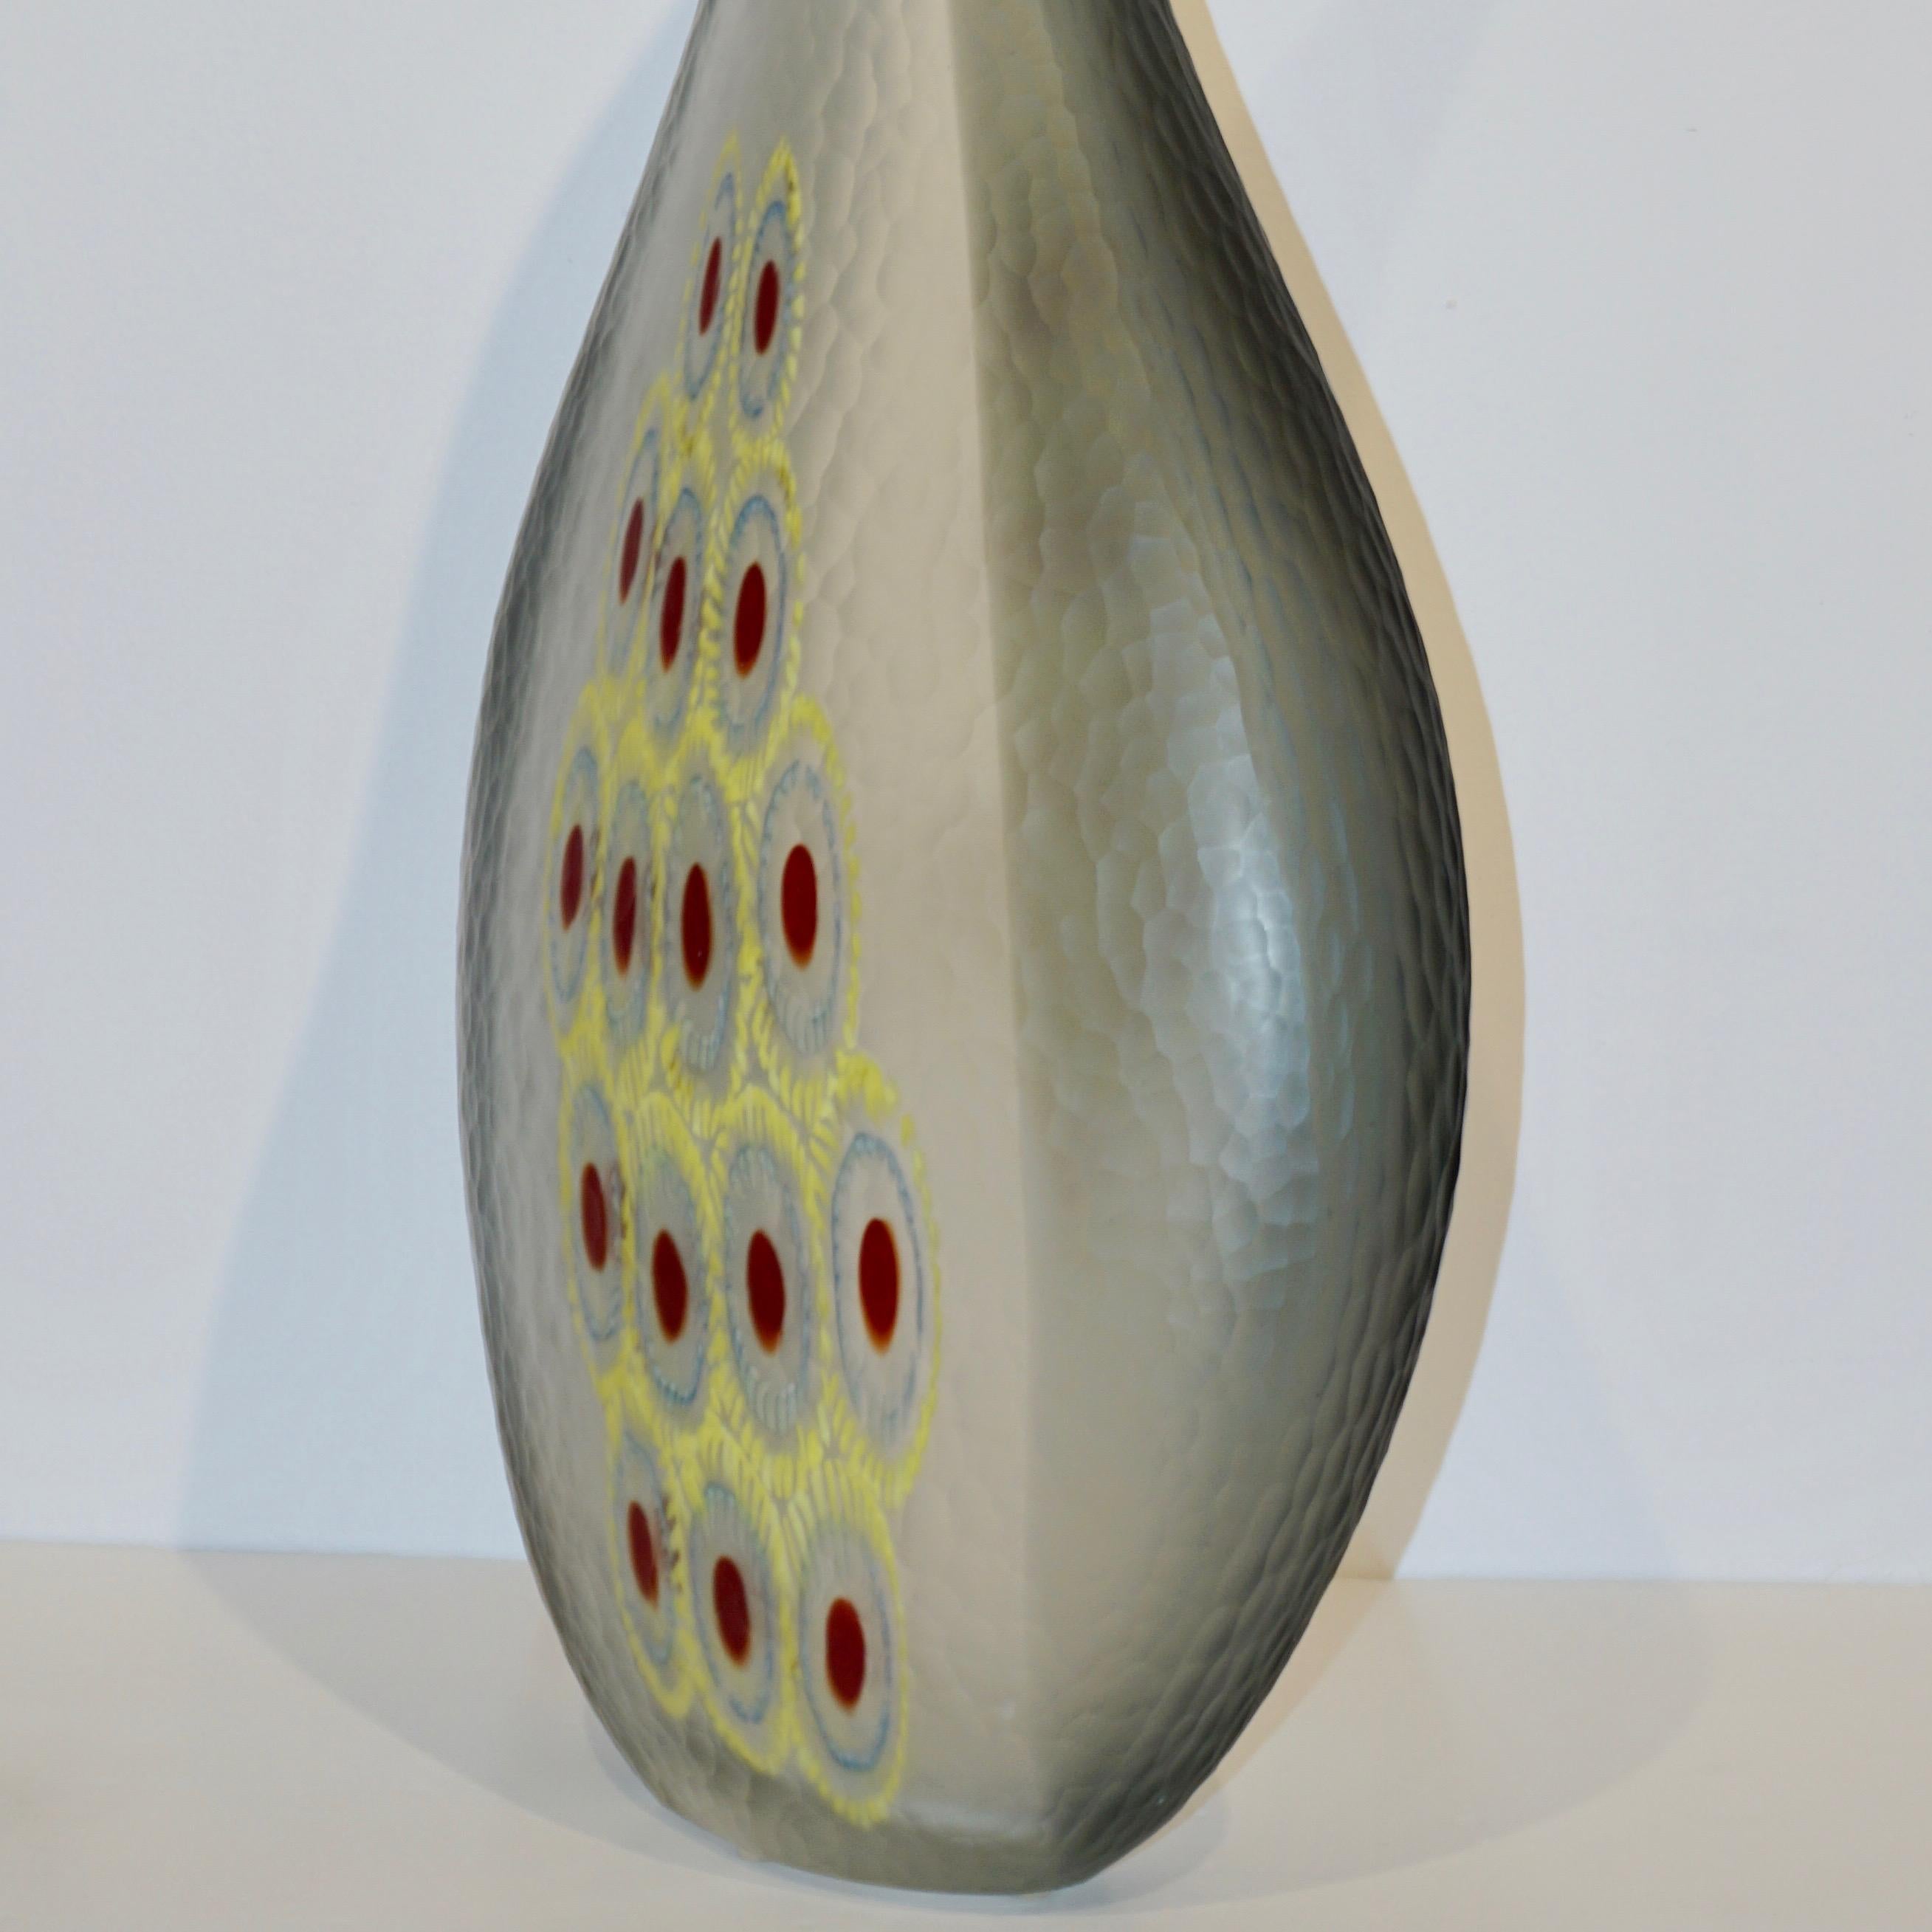 Dona Modern Art Glass Smoked Gray Sculptural Vase with Red and Yellow Murrine For Sale 4